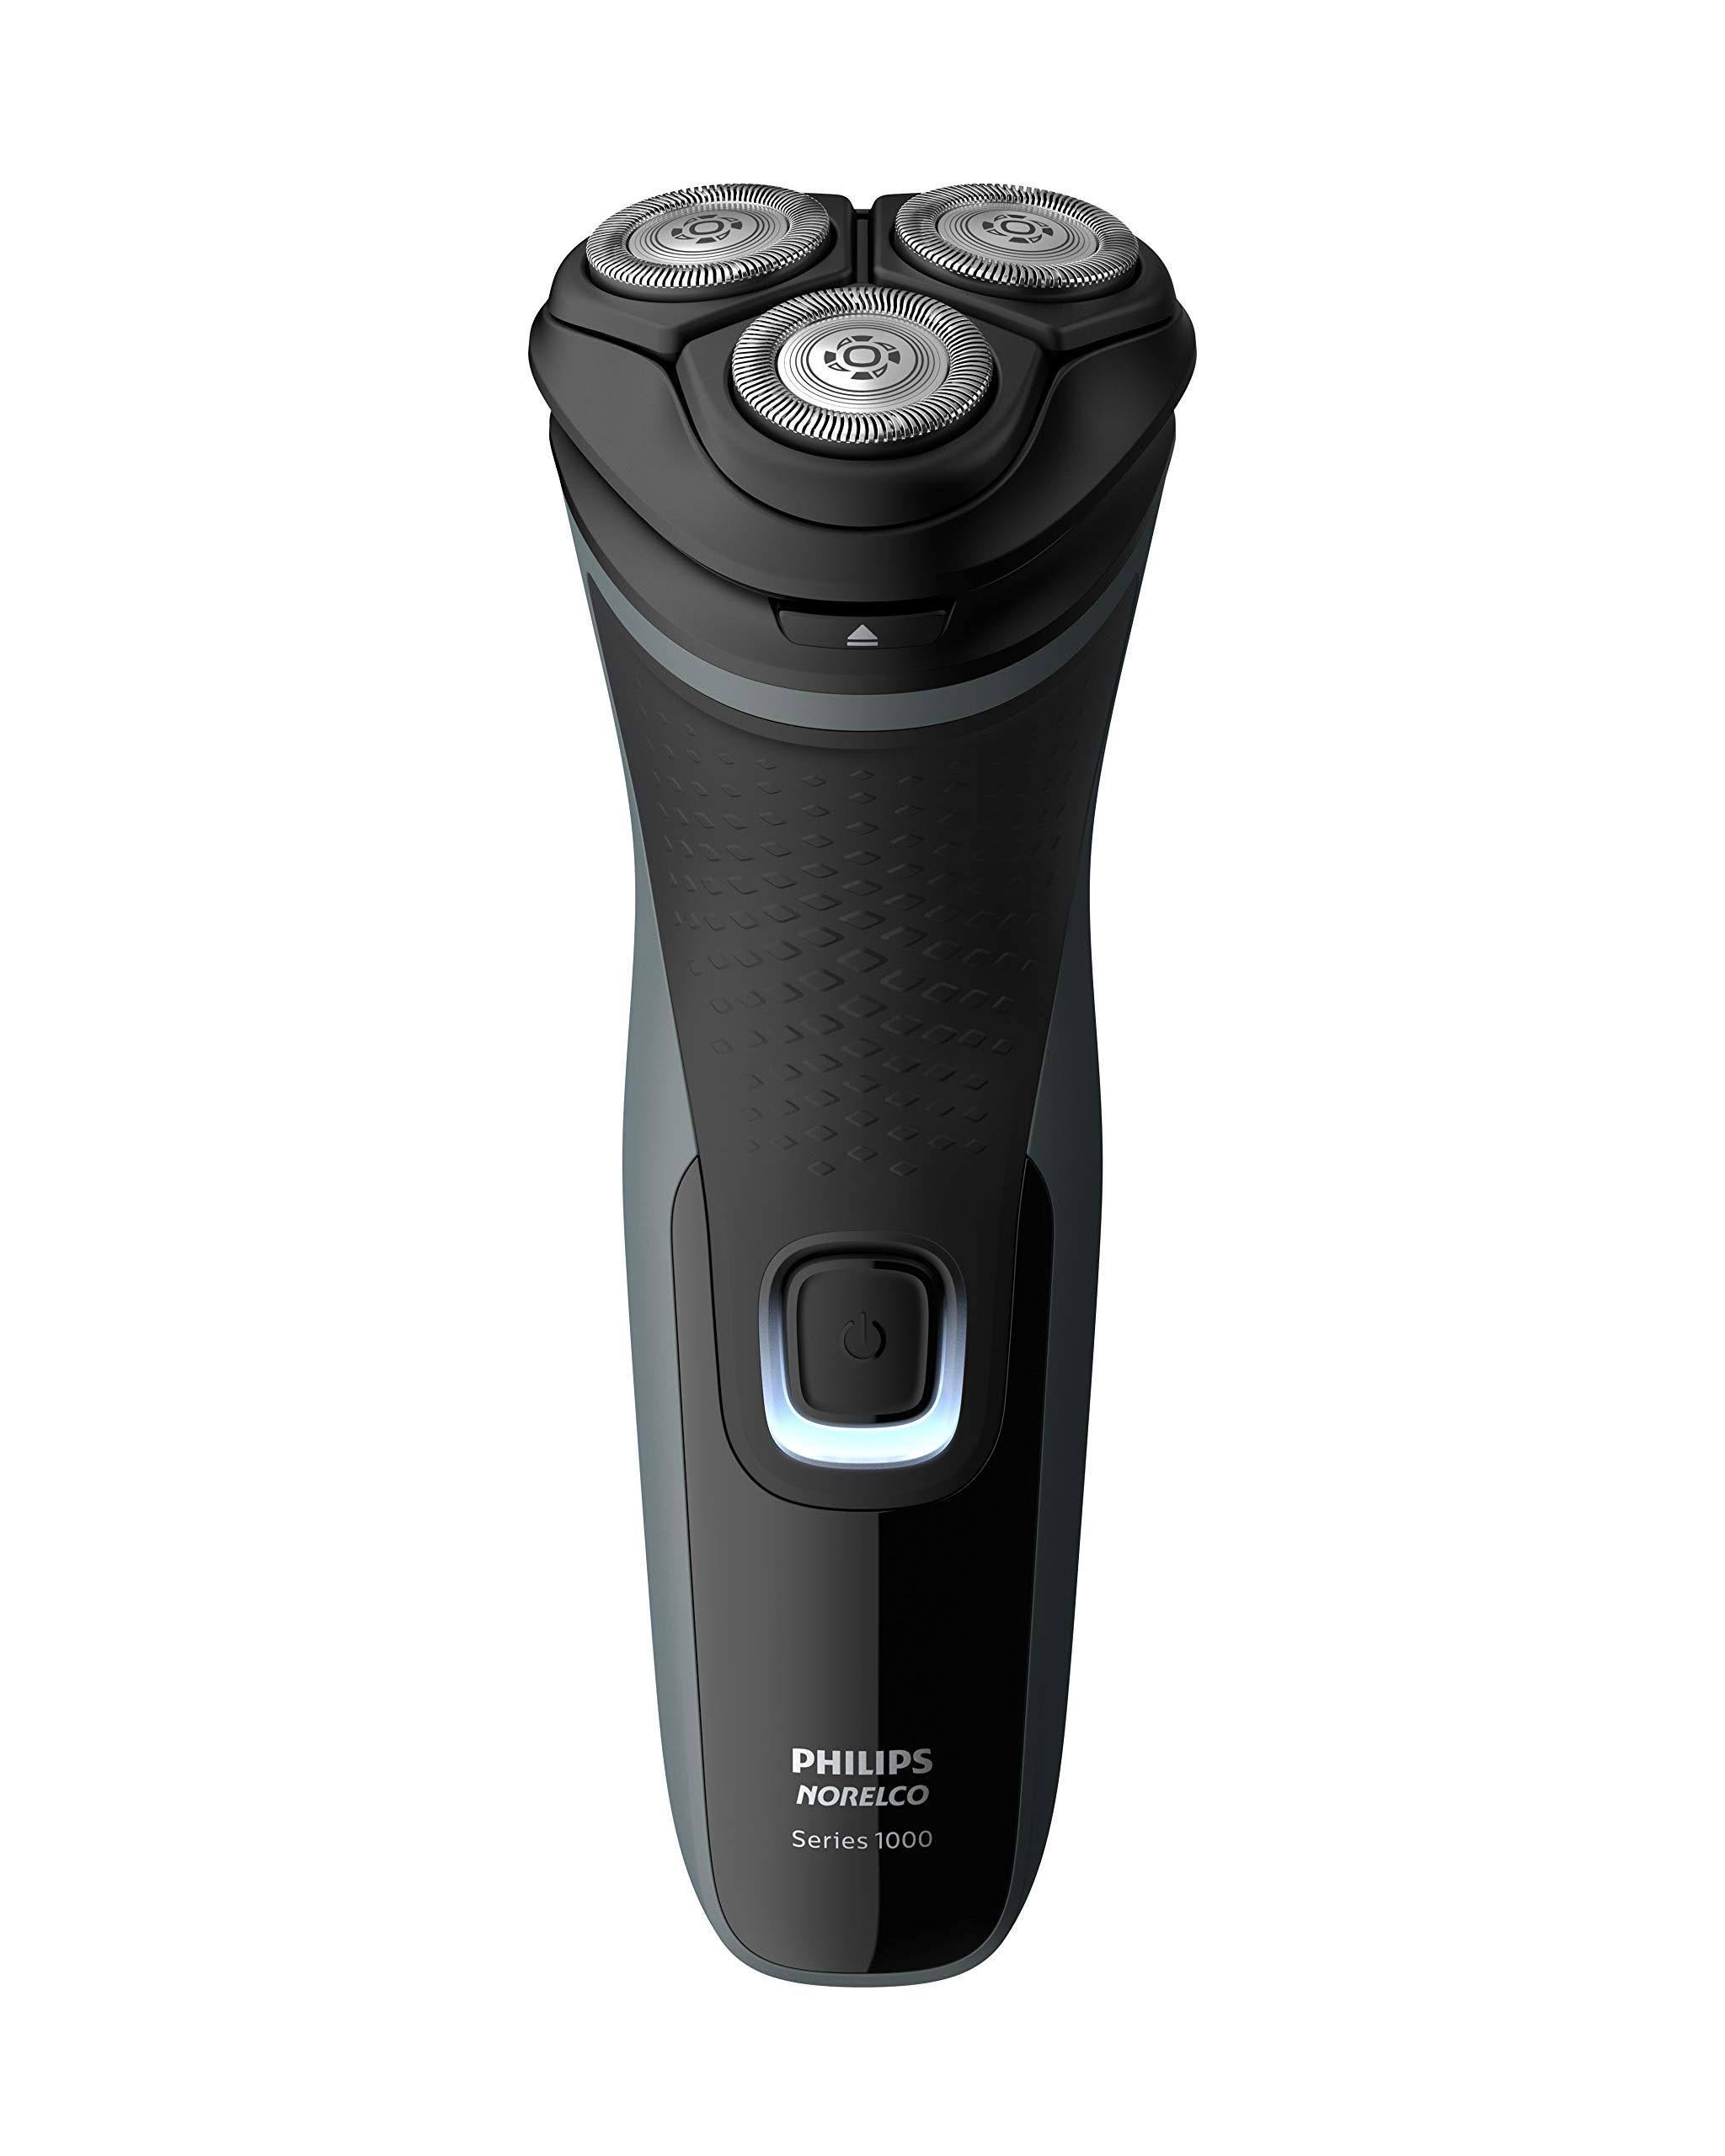 Norelco Shaver 2300, Rechargeable Electric Shaver with Pop-up Trimmer, S1211/81